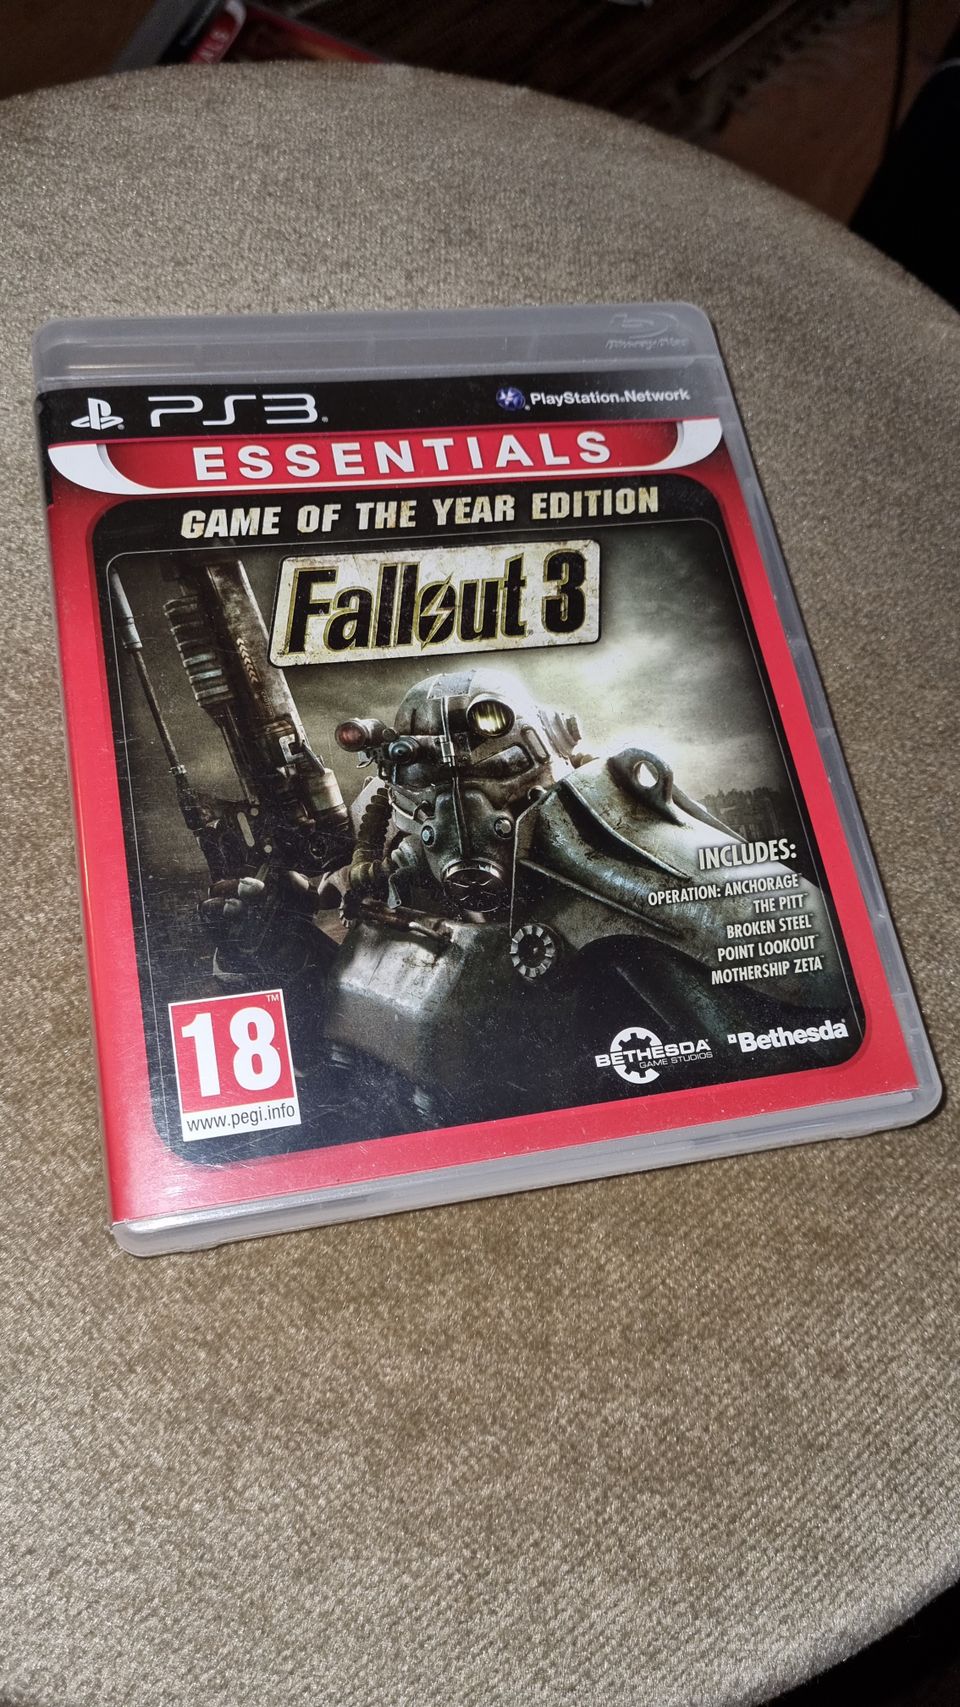 PS3/Playstation 3: Fallout 3 "Game of the year edition"